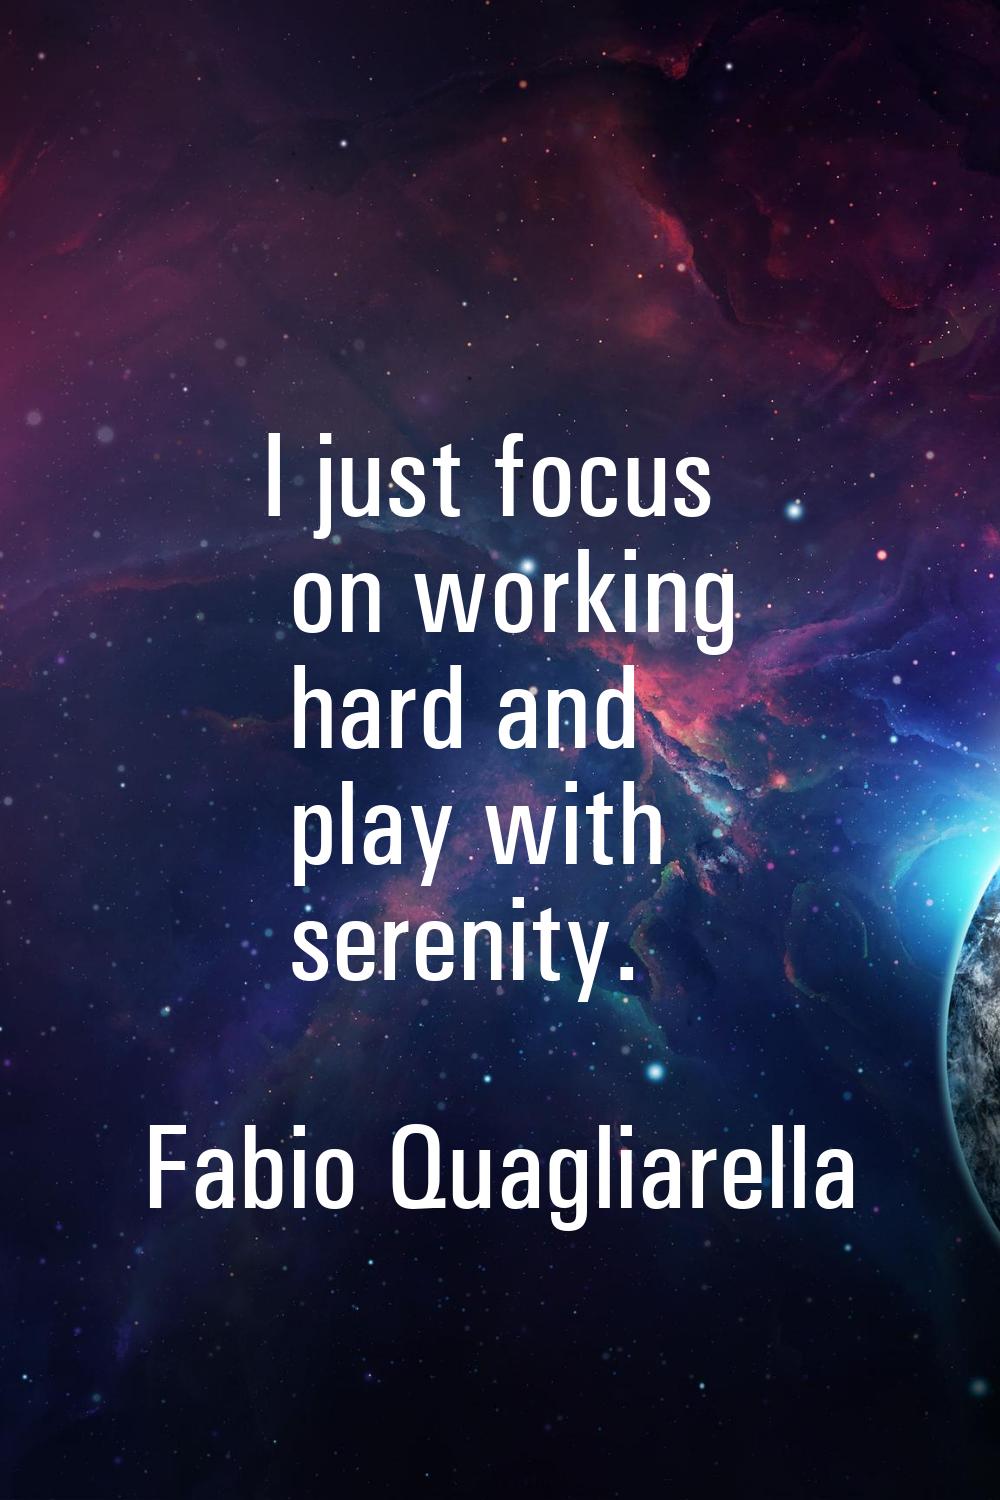 I just focus on working hard and play with serenity.